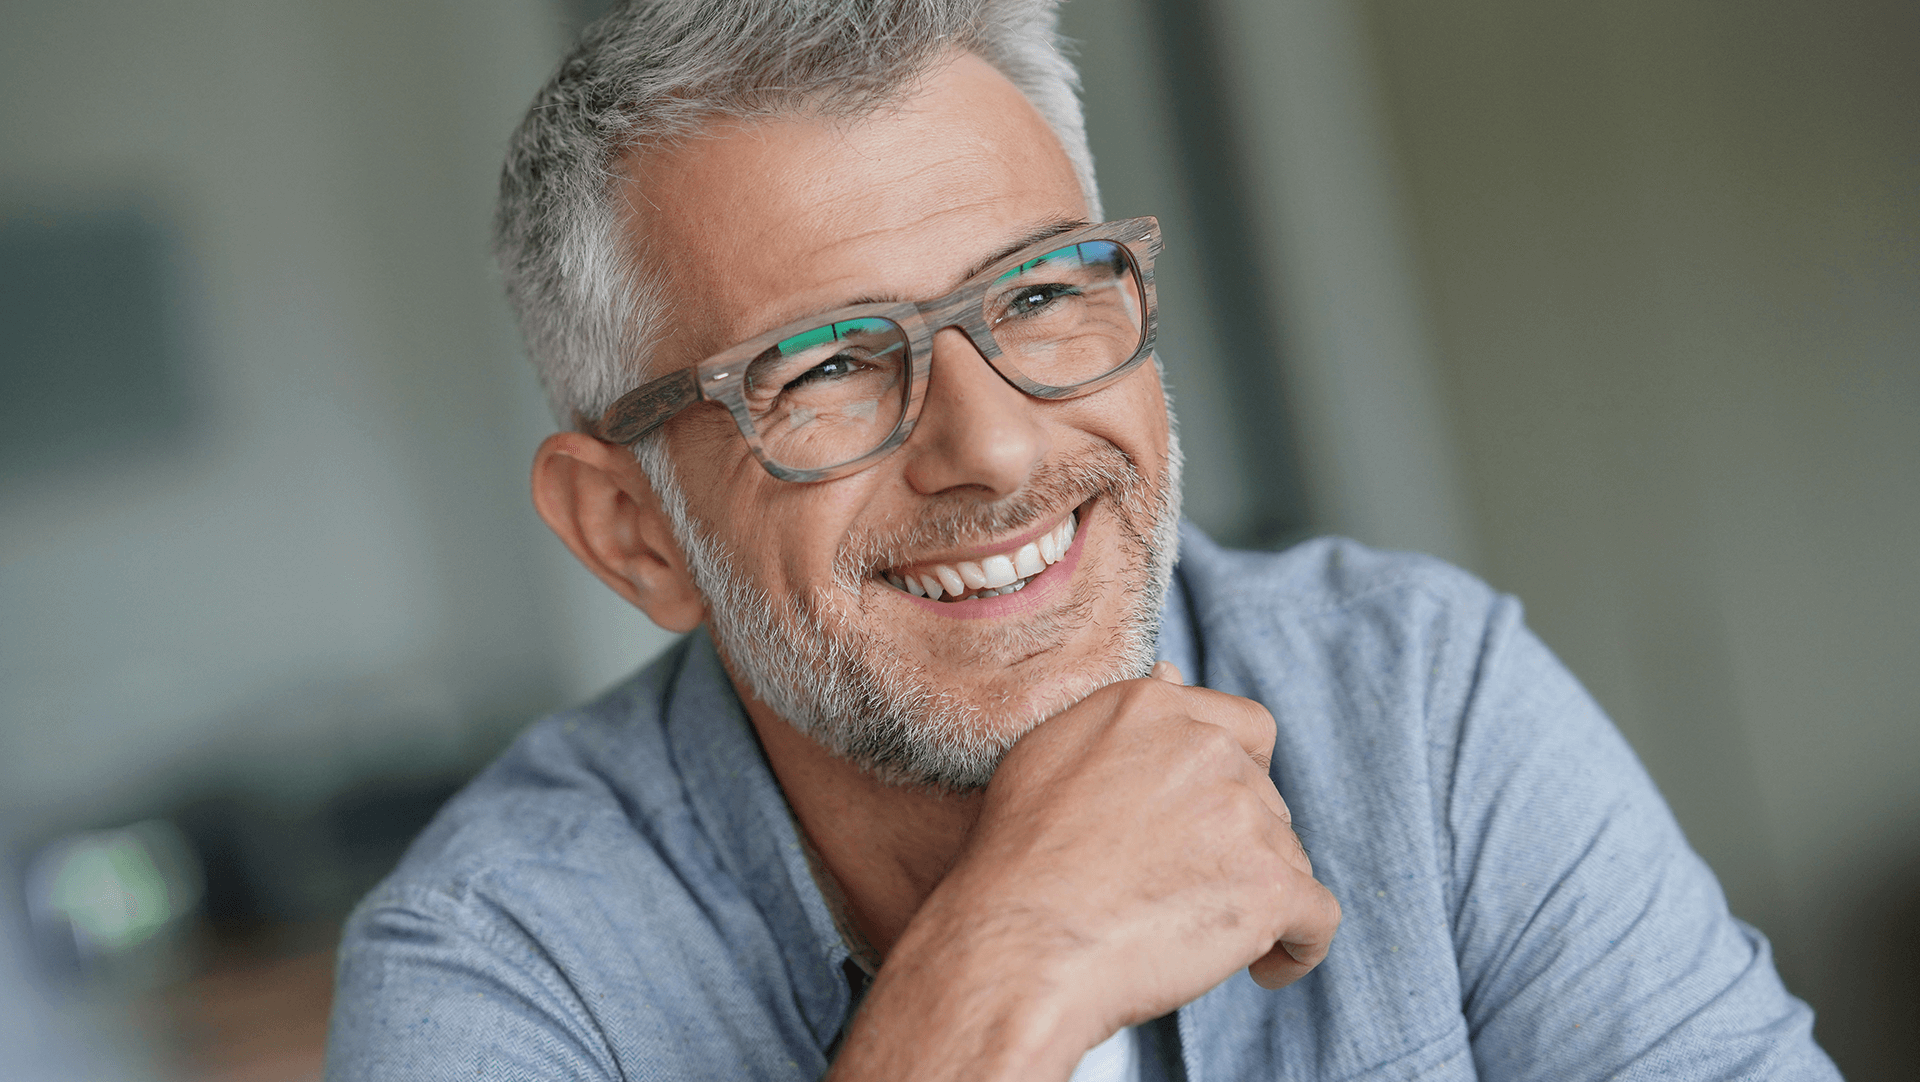 A cheerful mature man with glasses, smiling and looking off into the distance with a look of contentment and optimism.